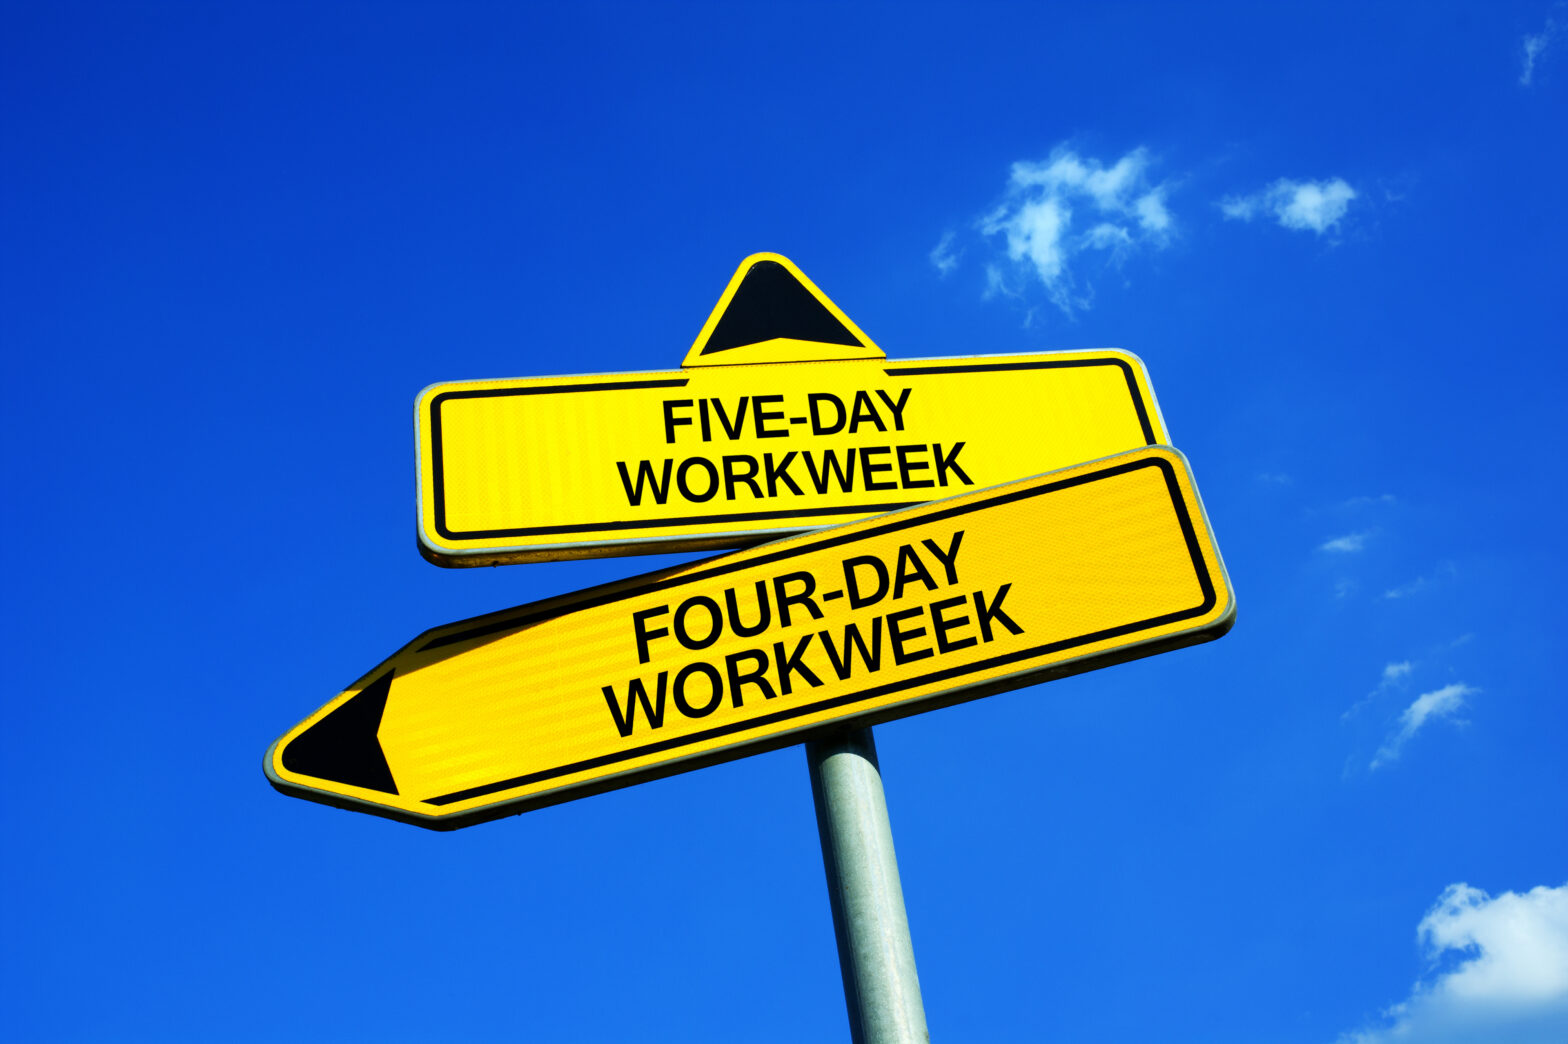 More companies are considering a four-day work week as a viable option